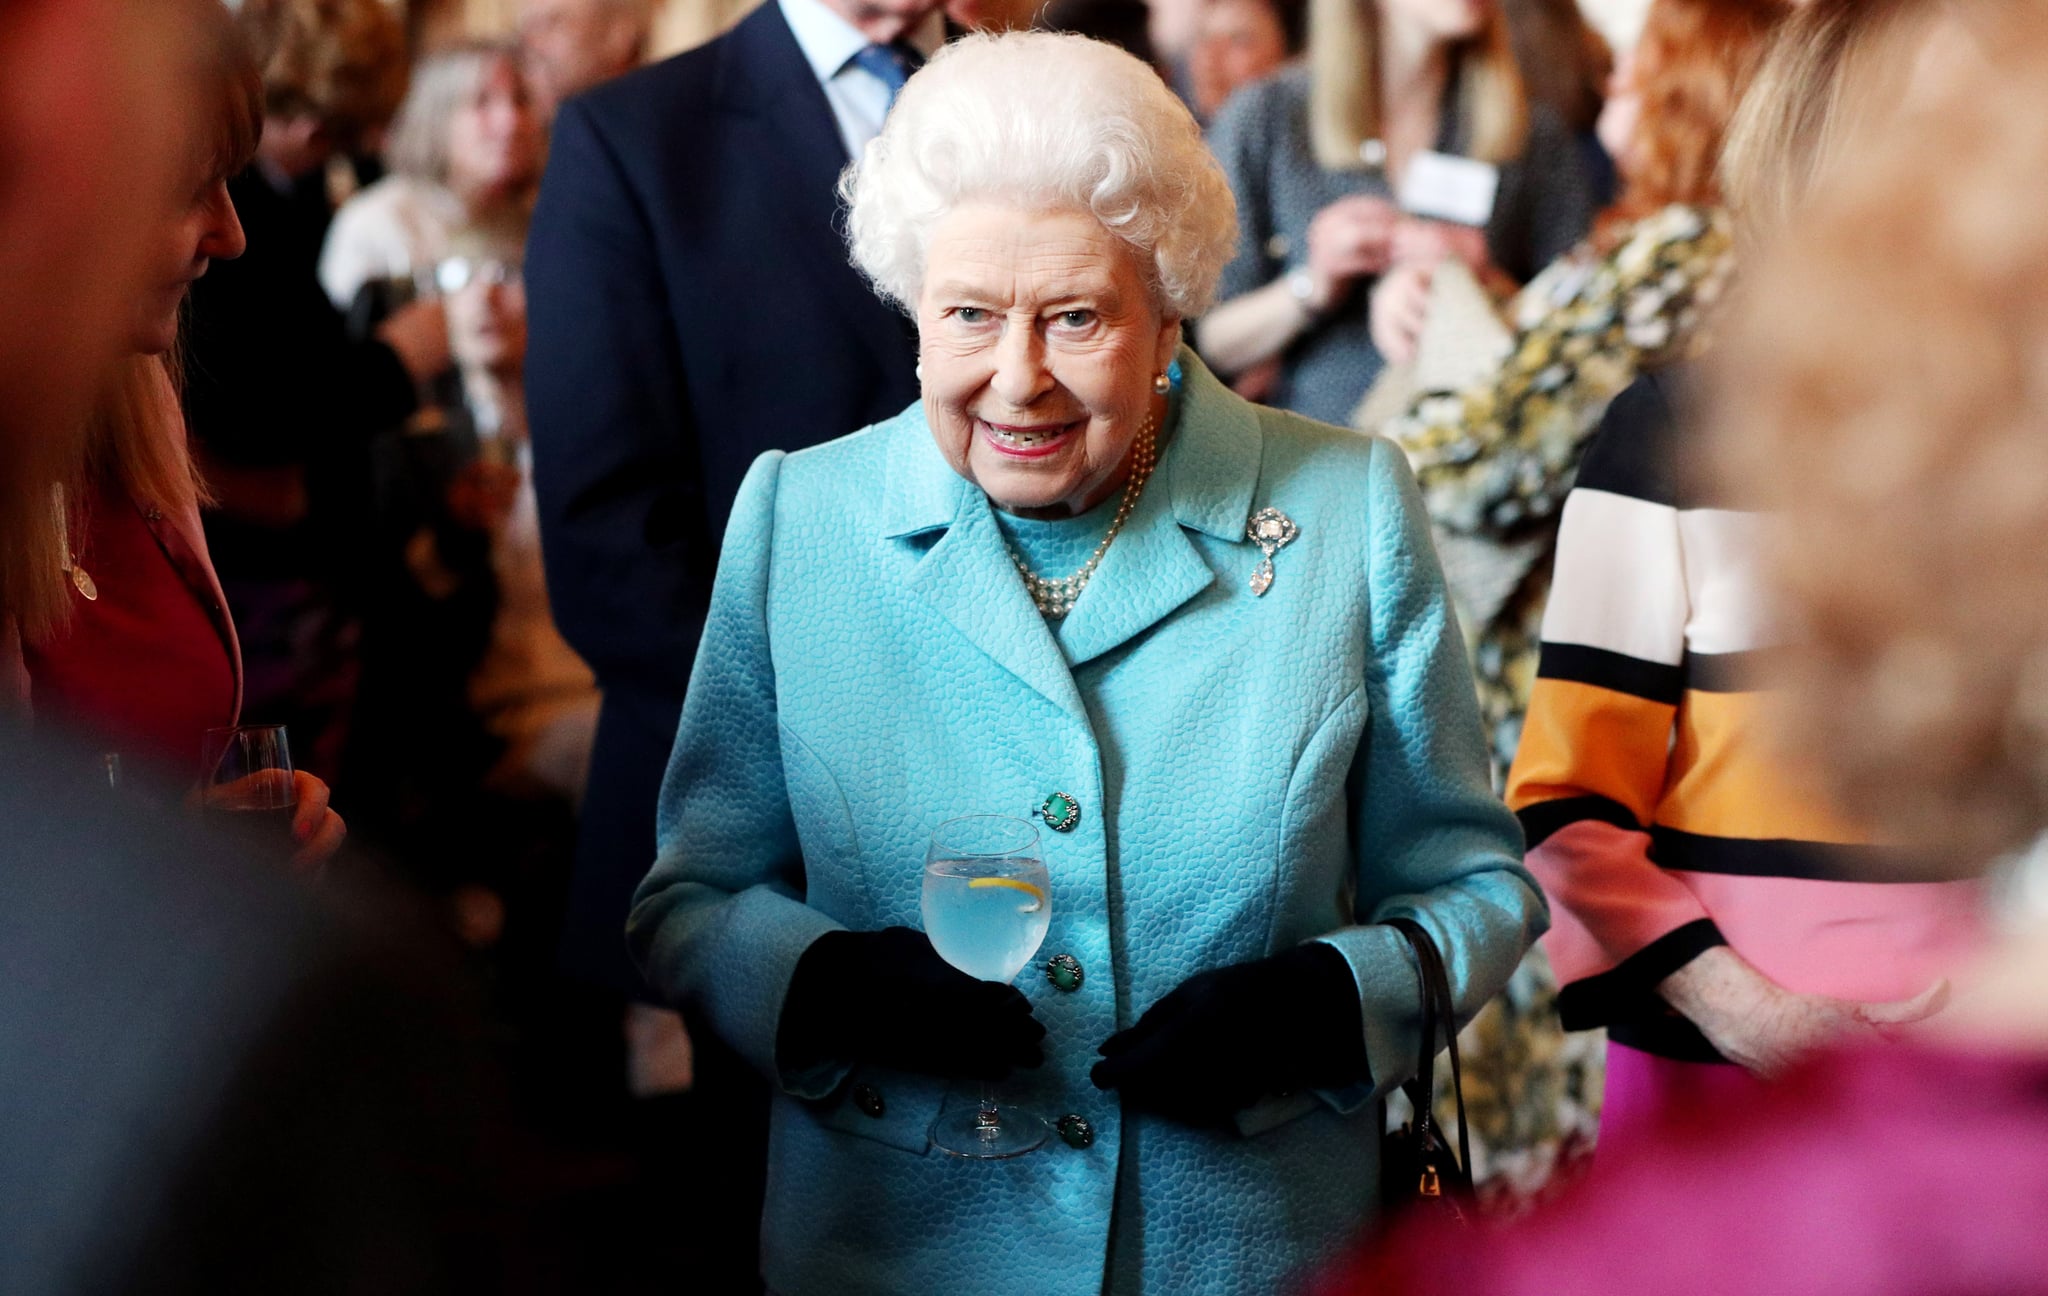 Queen Elizabeth II's 2019 reception for the 100th anniversary of the National Council For Voluntary Organisations